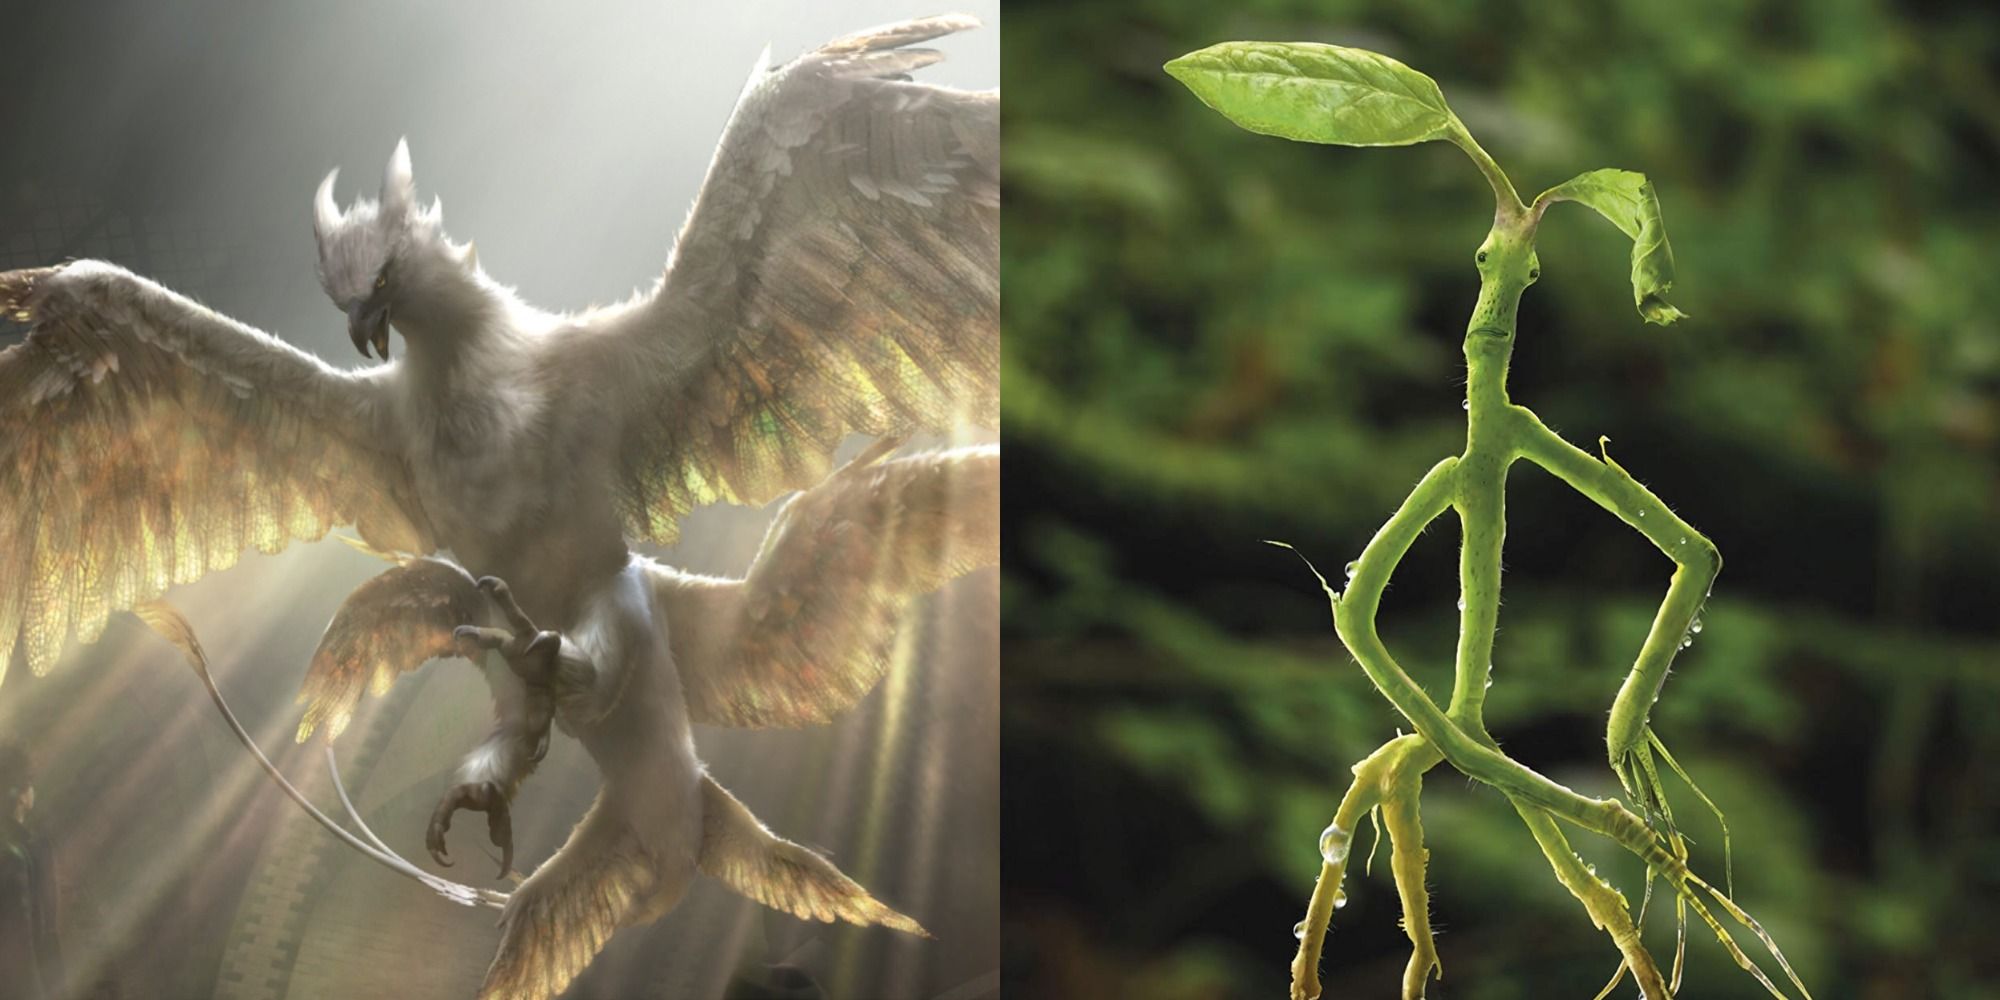 Split image: Thunderbird, Bowtruckle from the Fantastic Beasts movies